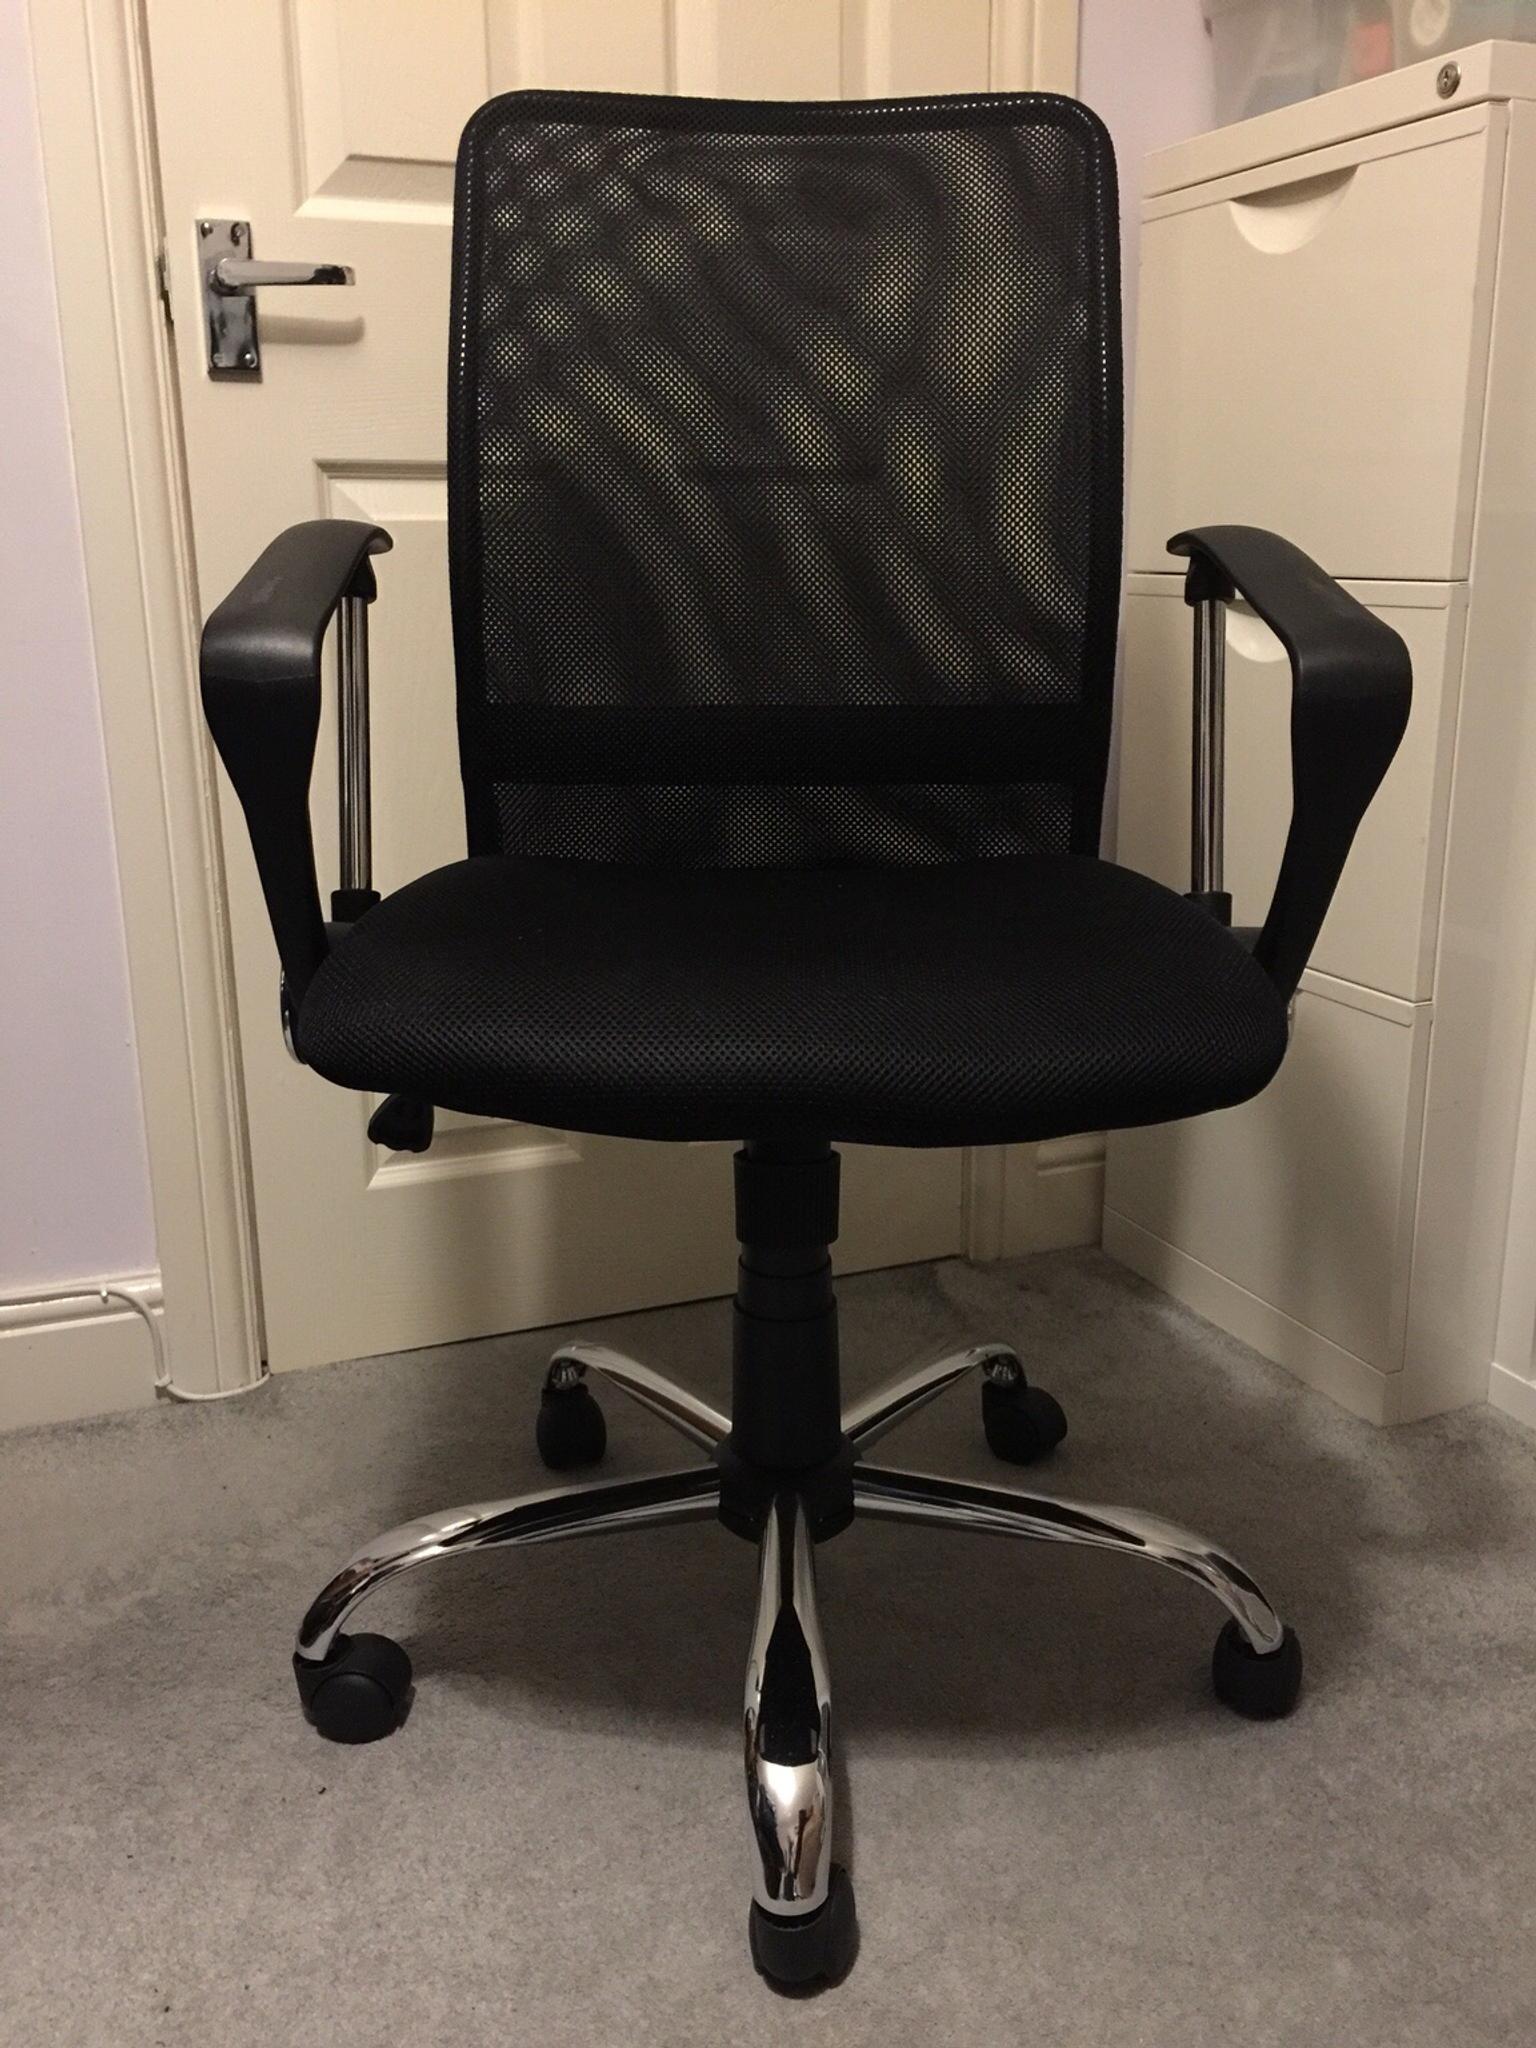 mesh mid back adjustable office chair in me20 malling für 15